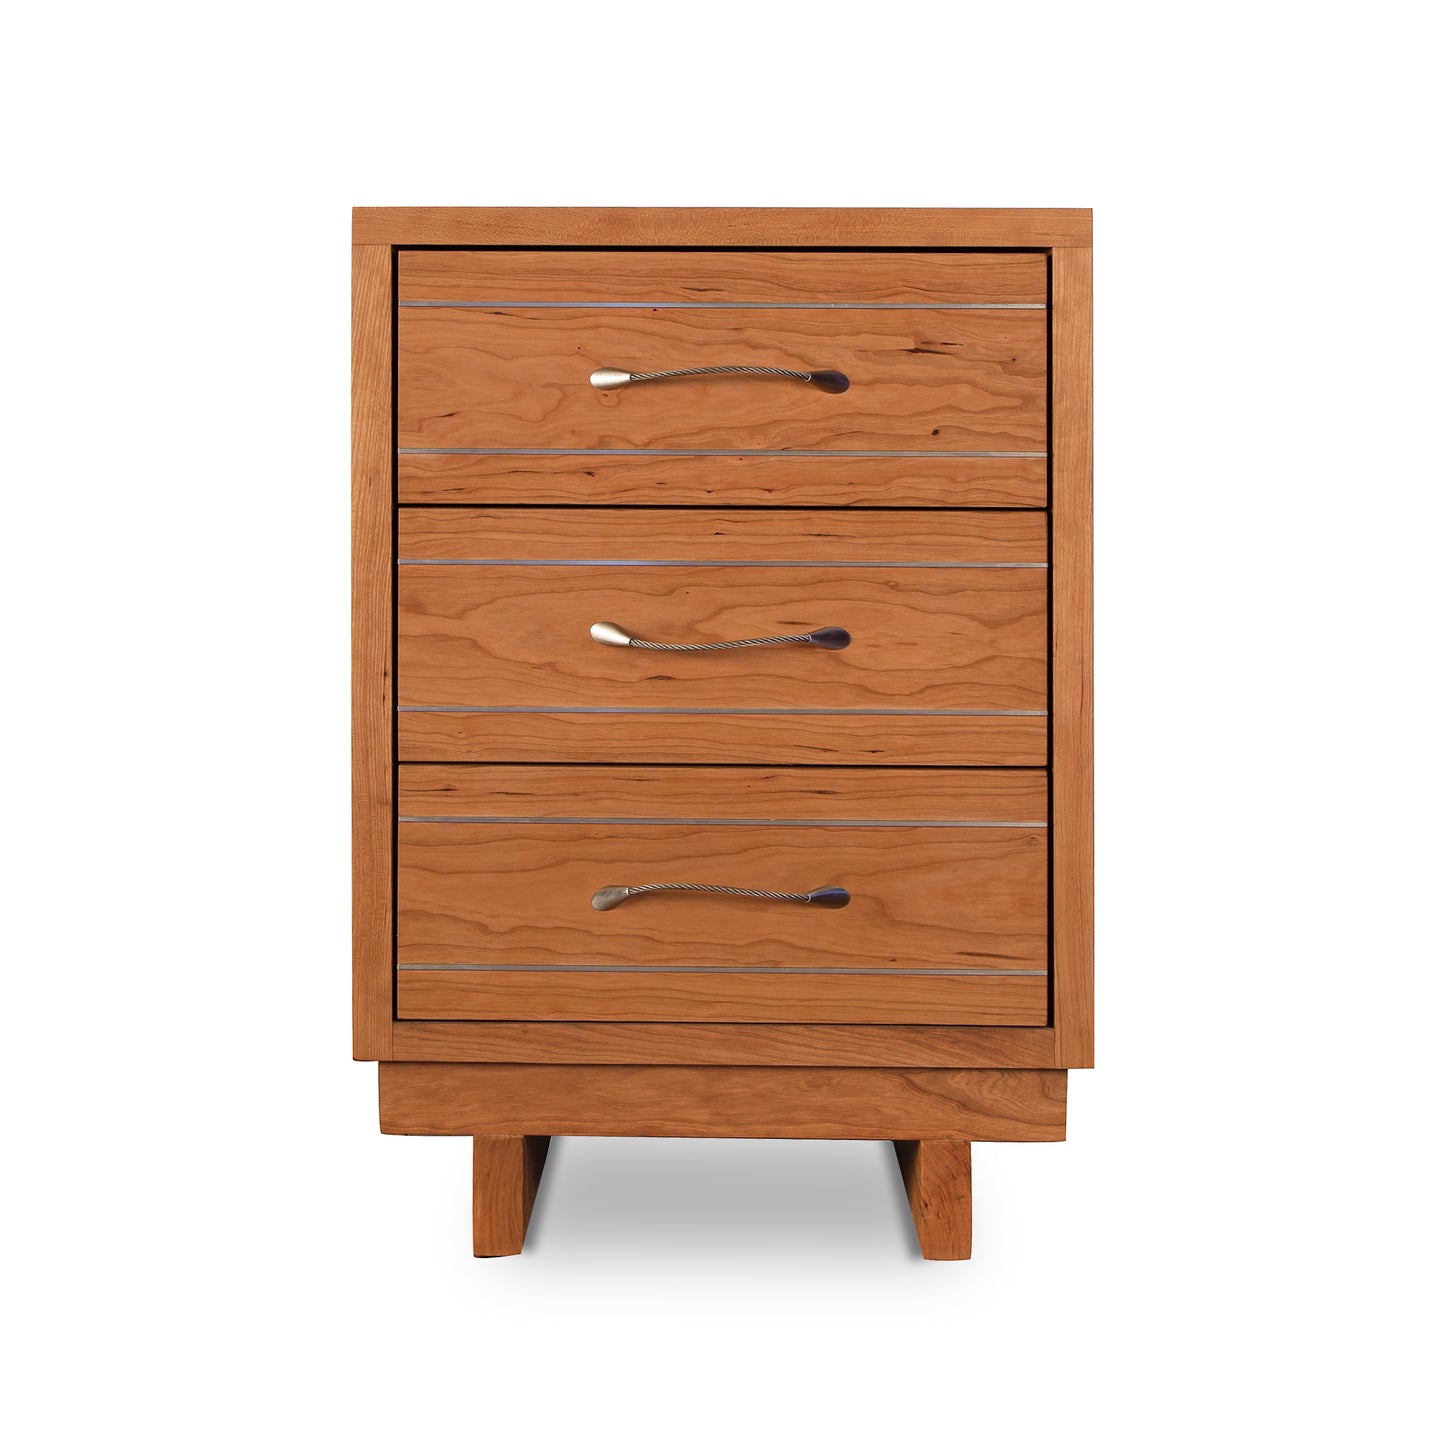 A wooden four-drawer dresser with metal handles and dovetail drawers on a white background by Vermont Furniture Designs.